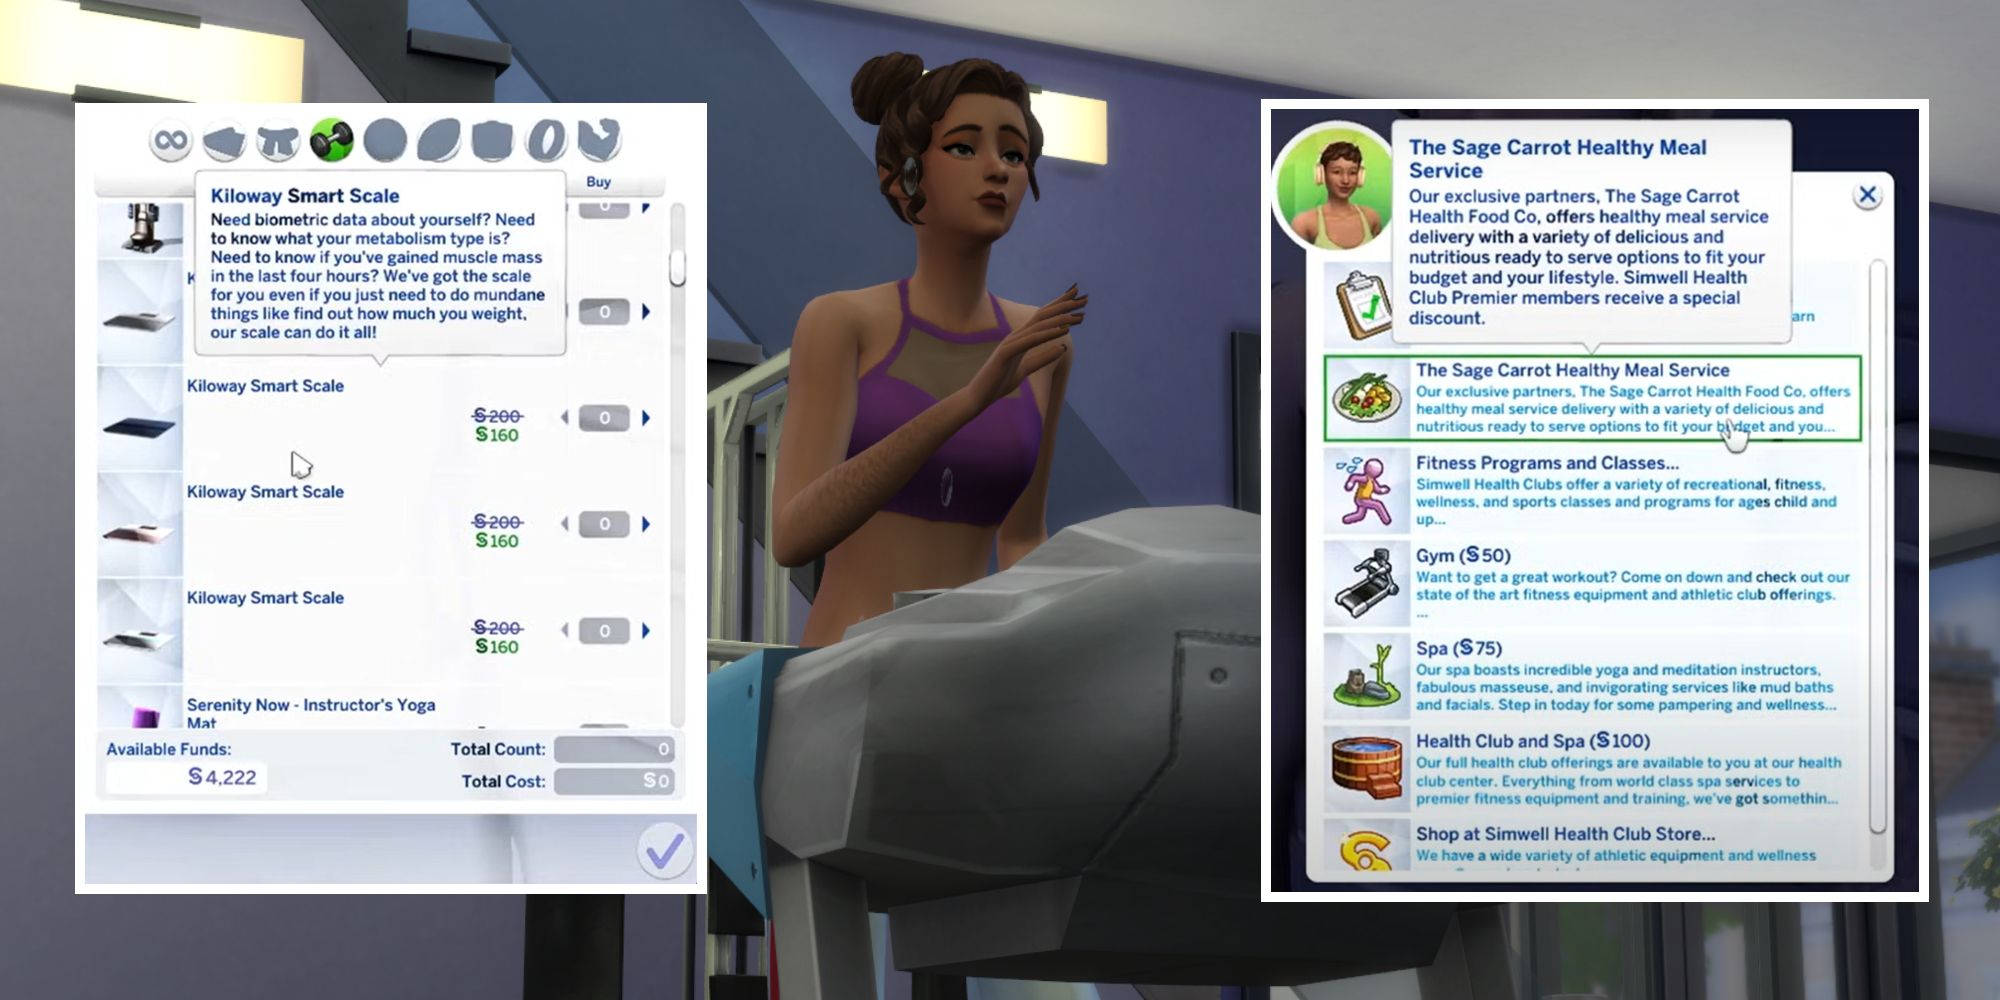 A Sim is working out to achieve their fitness goals using the Healthy Living Mod